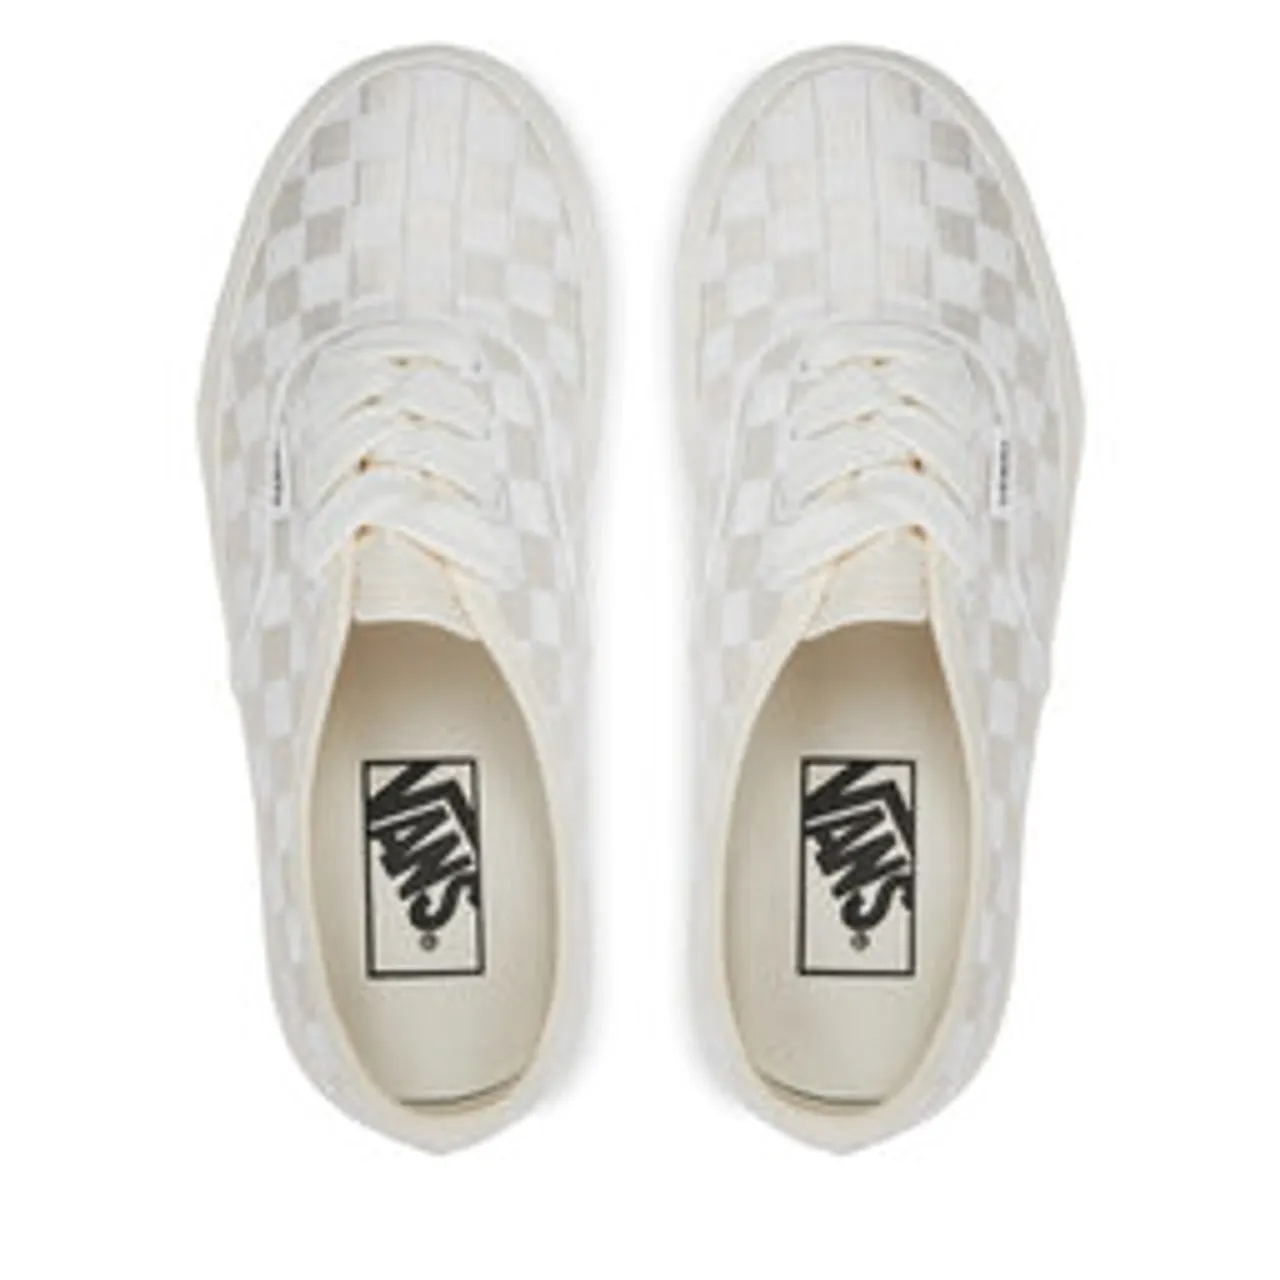 Sneakers aus Stoff Vans Authentic VN0009PVCJD1 White